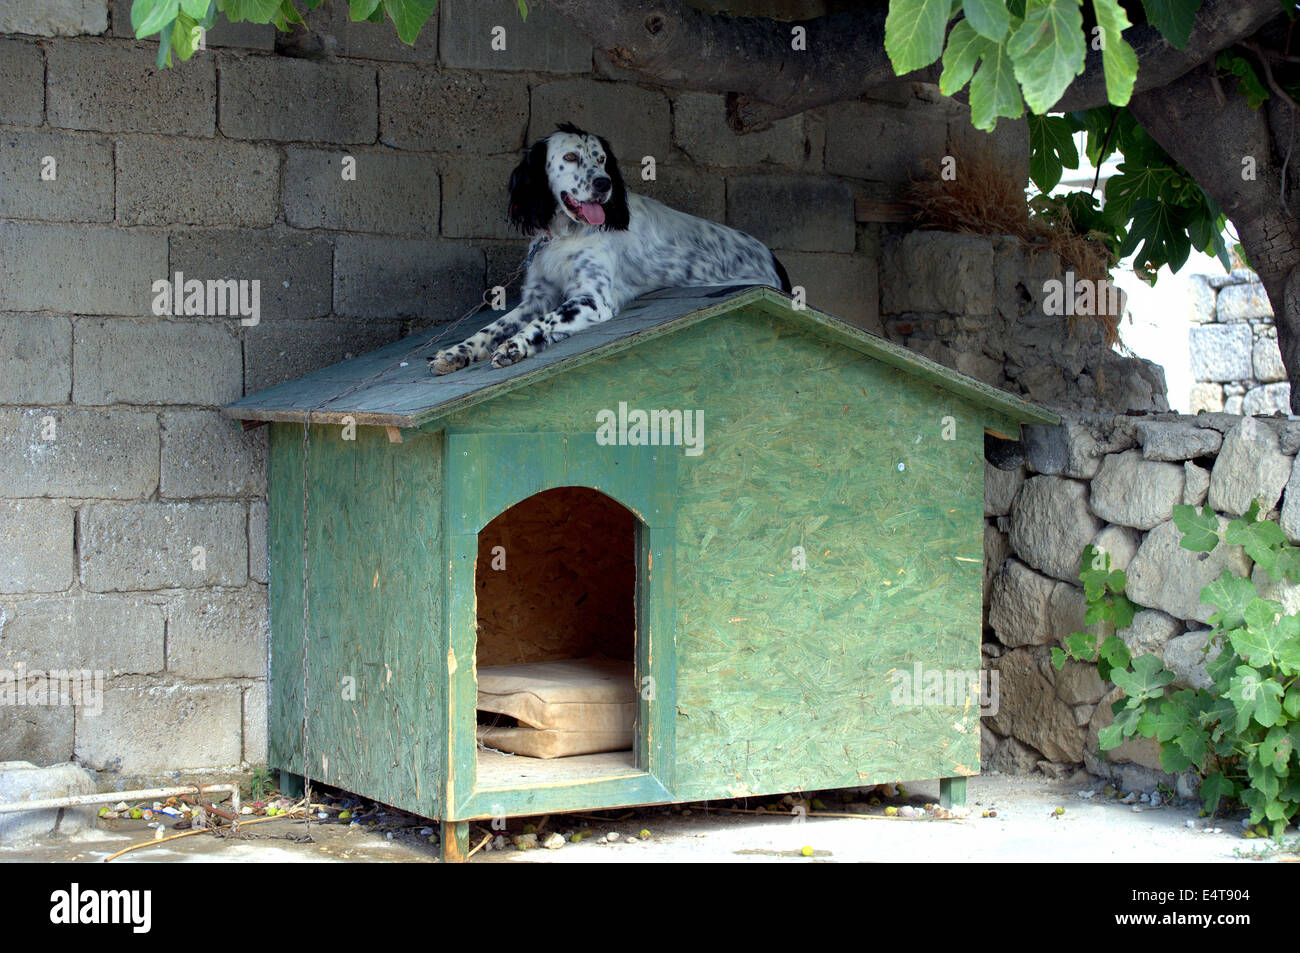 Dalmatian dog laying on the roof of dog house Stock Photo